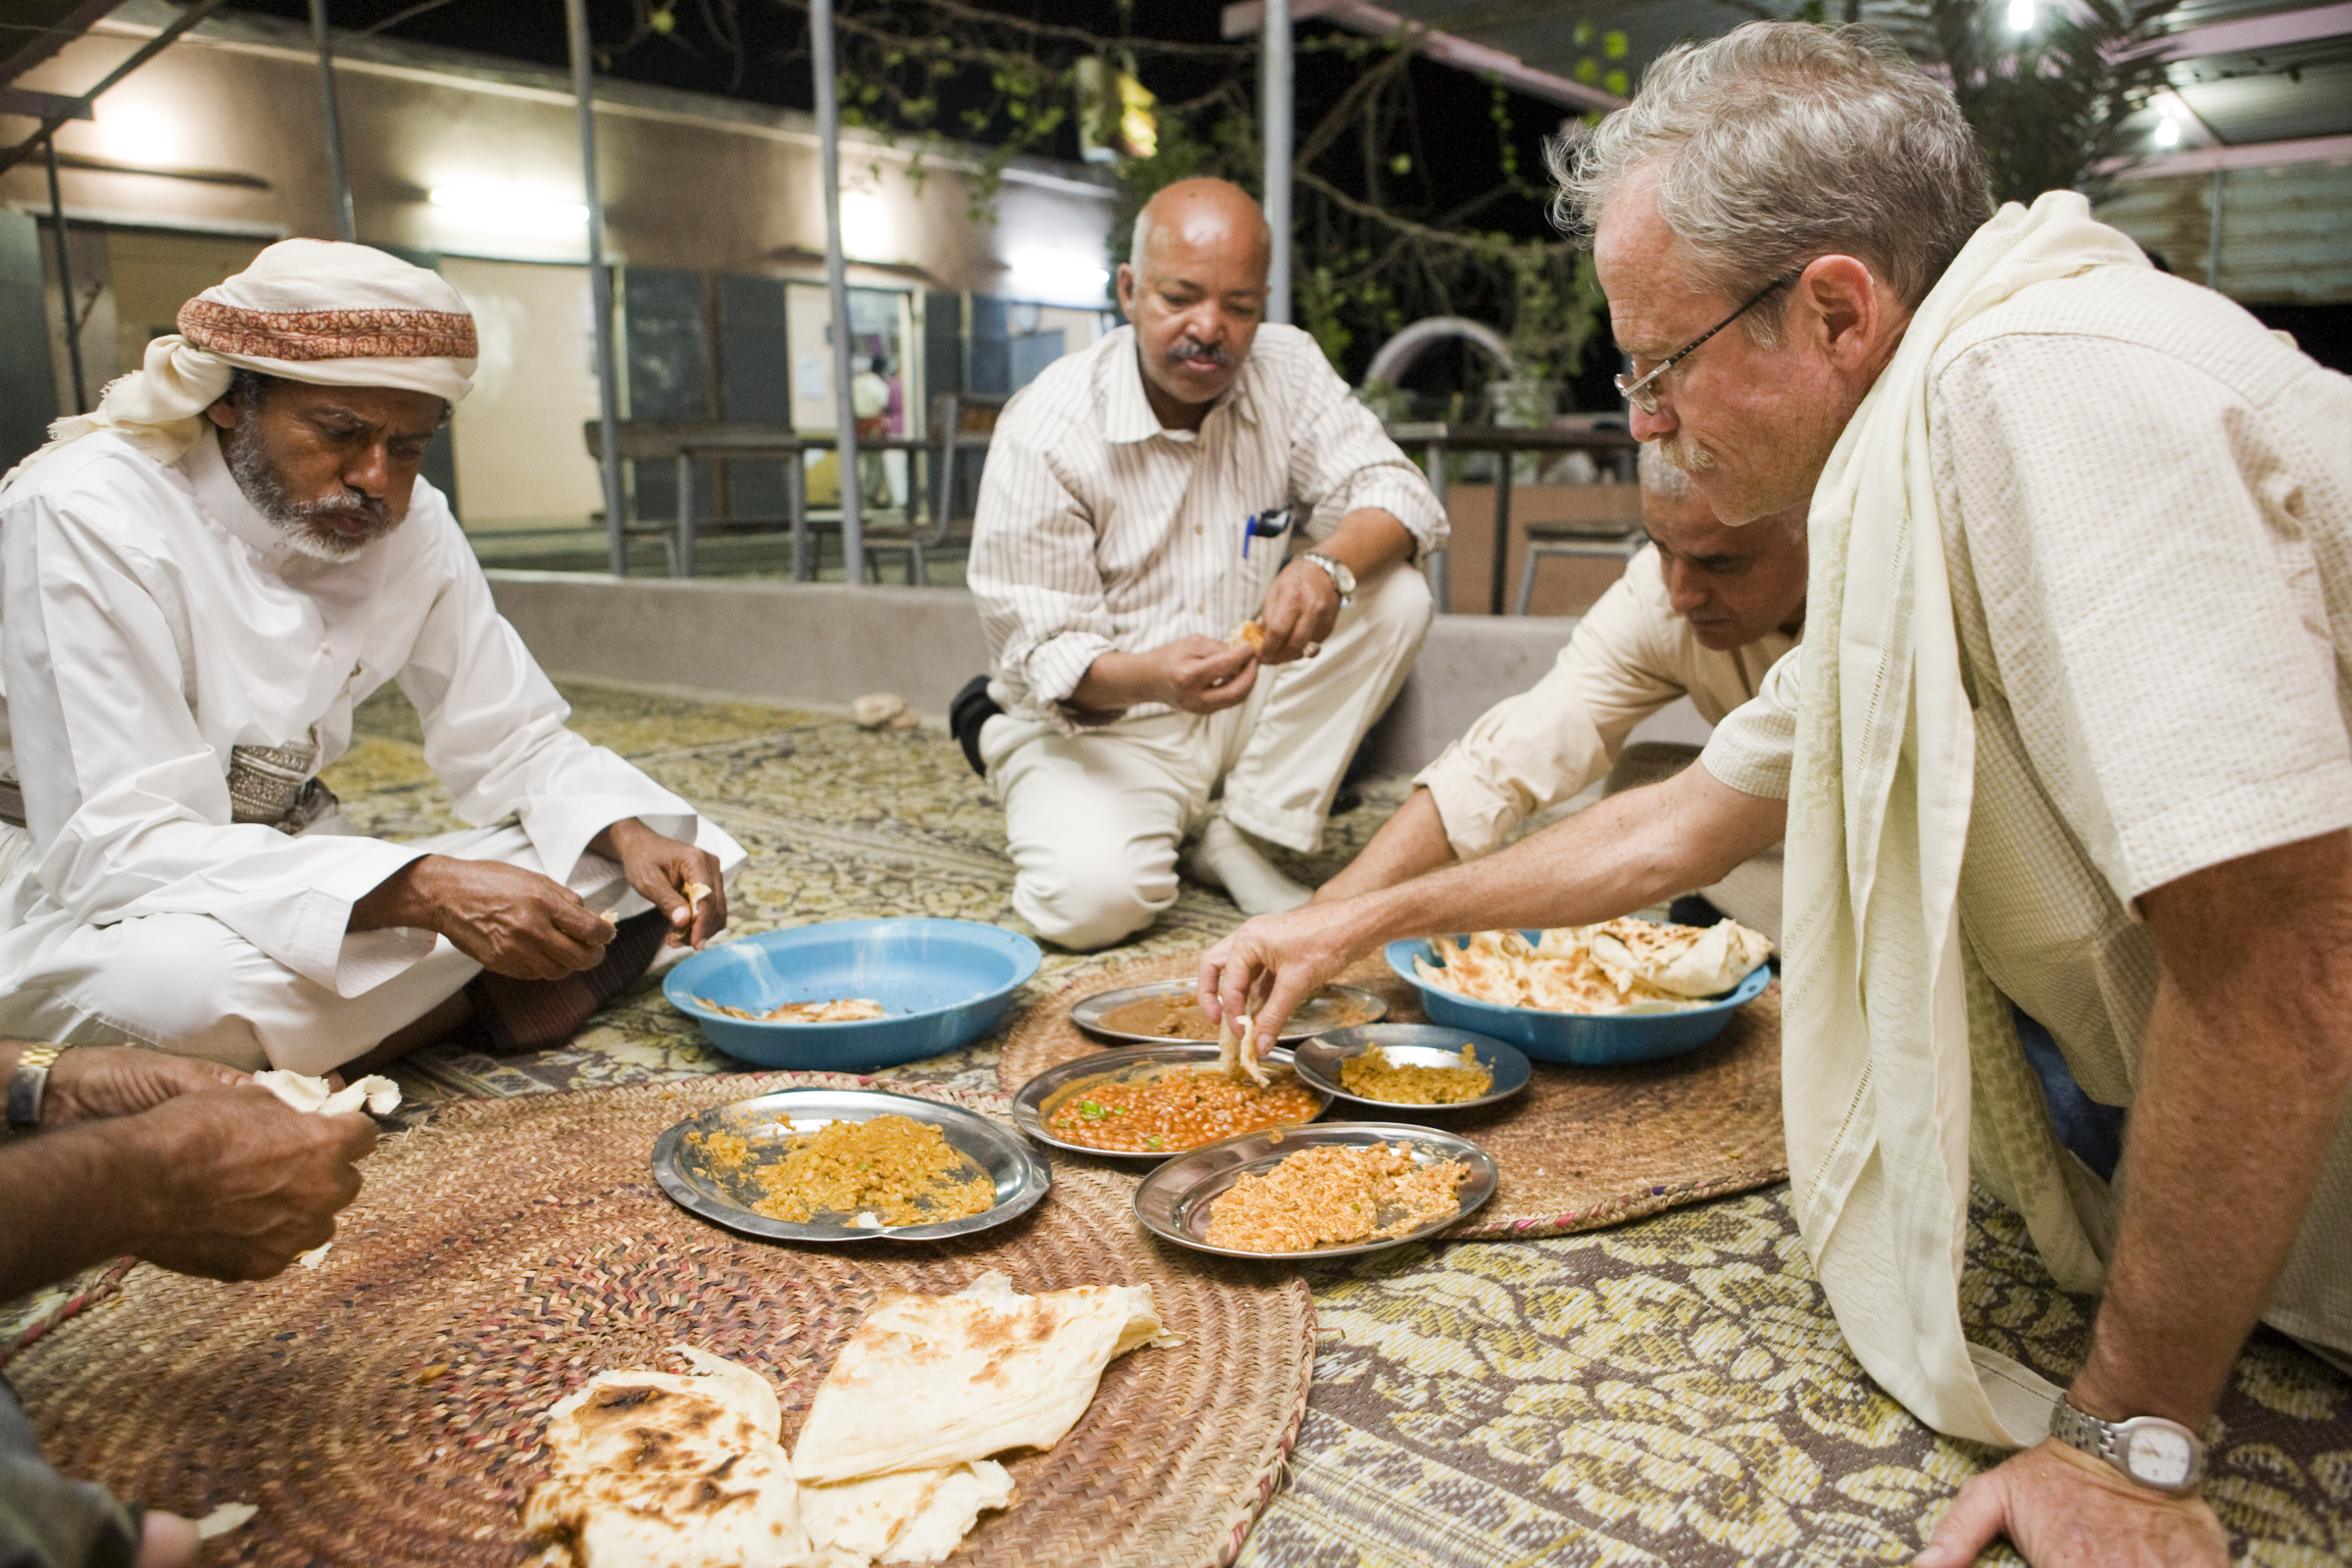 Arabian Leopard (Panthera pardus nimr) researcher David Stanton eating local food with Yousuf Mohageb, Mohammed Shamsan, and the minister of environment, Yemen